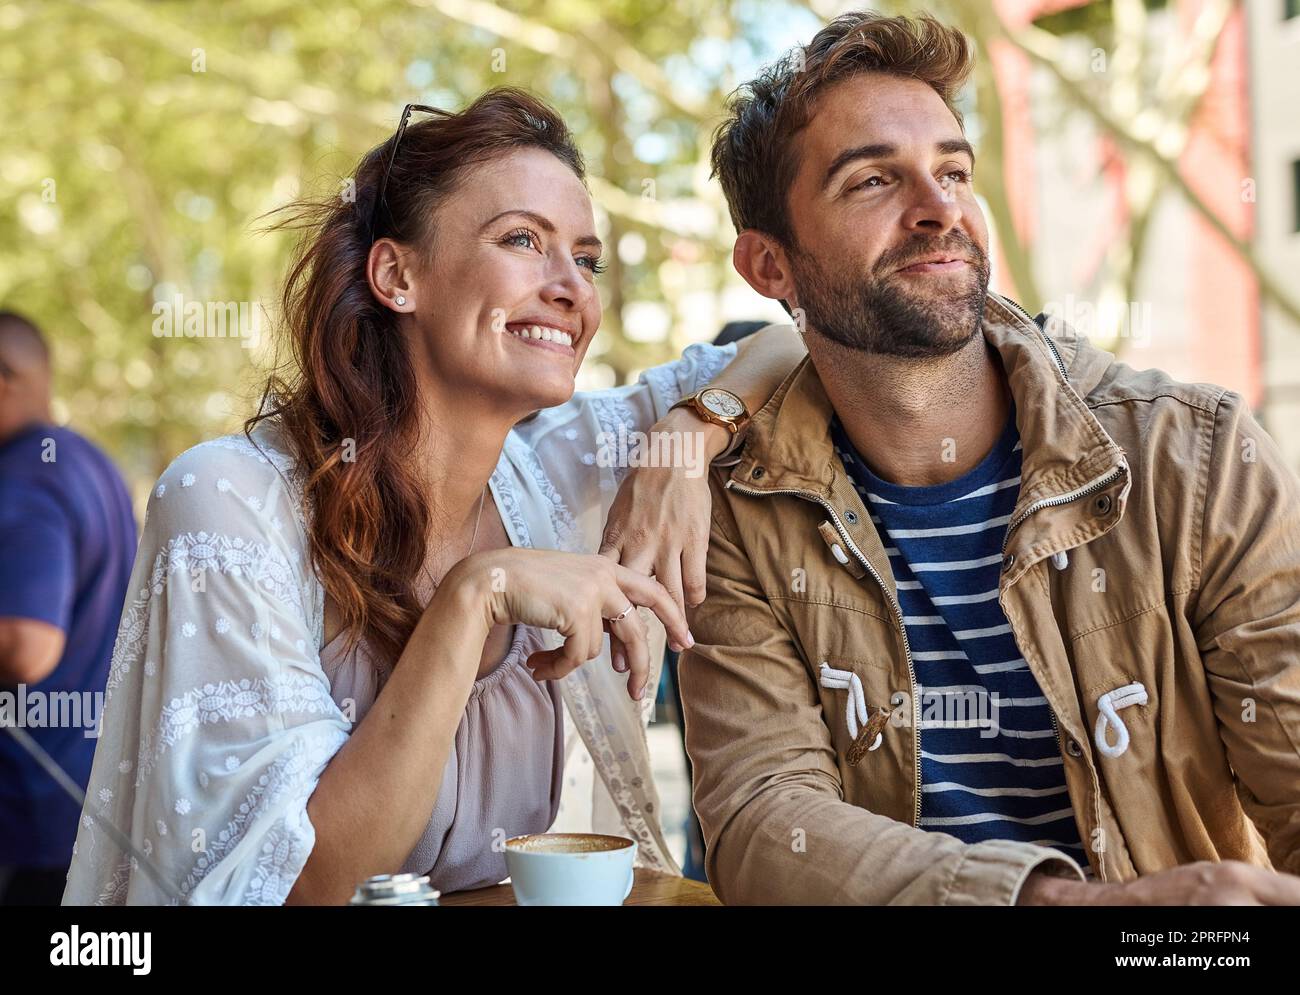 Coffee and a view - what more could we want. two relaxed tourists taking a break at a sidewalk cafe. Stock Photo